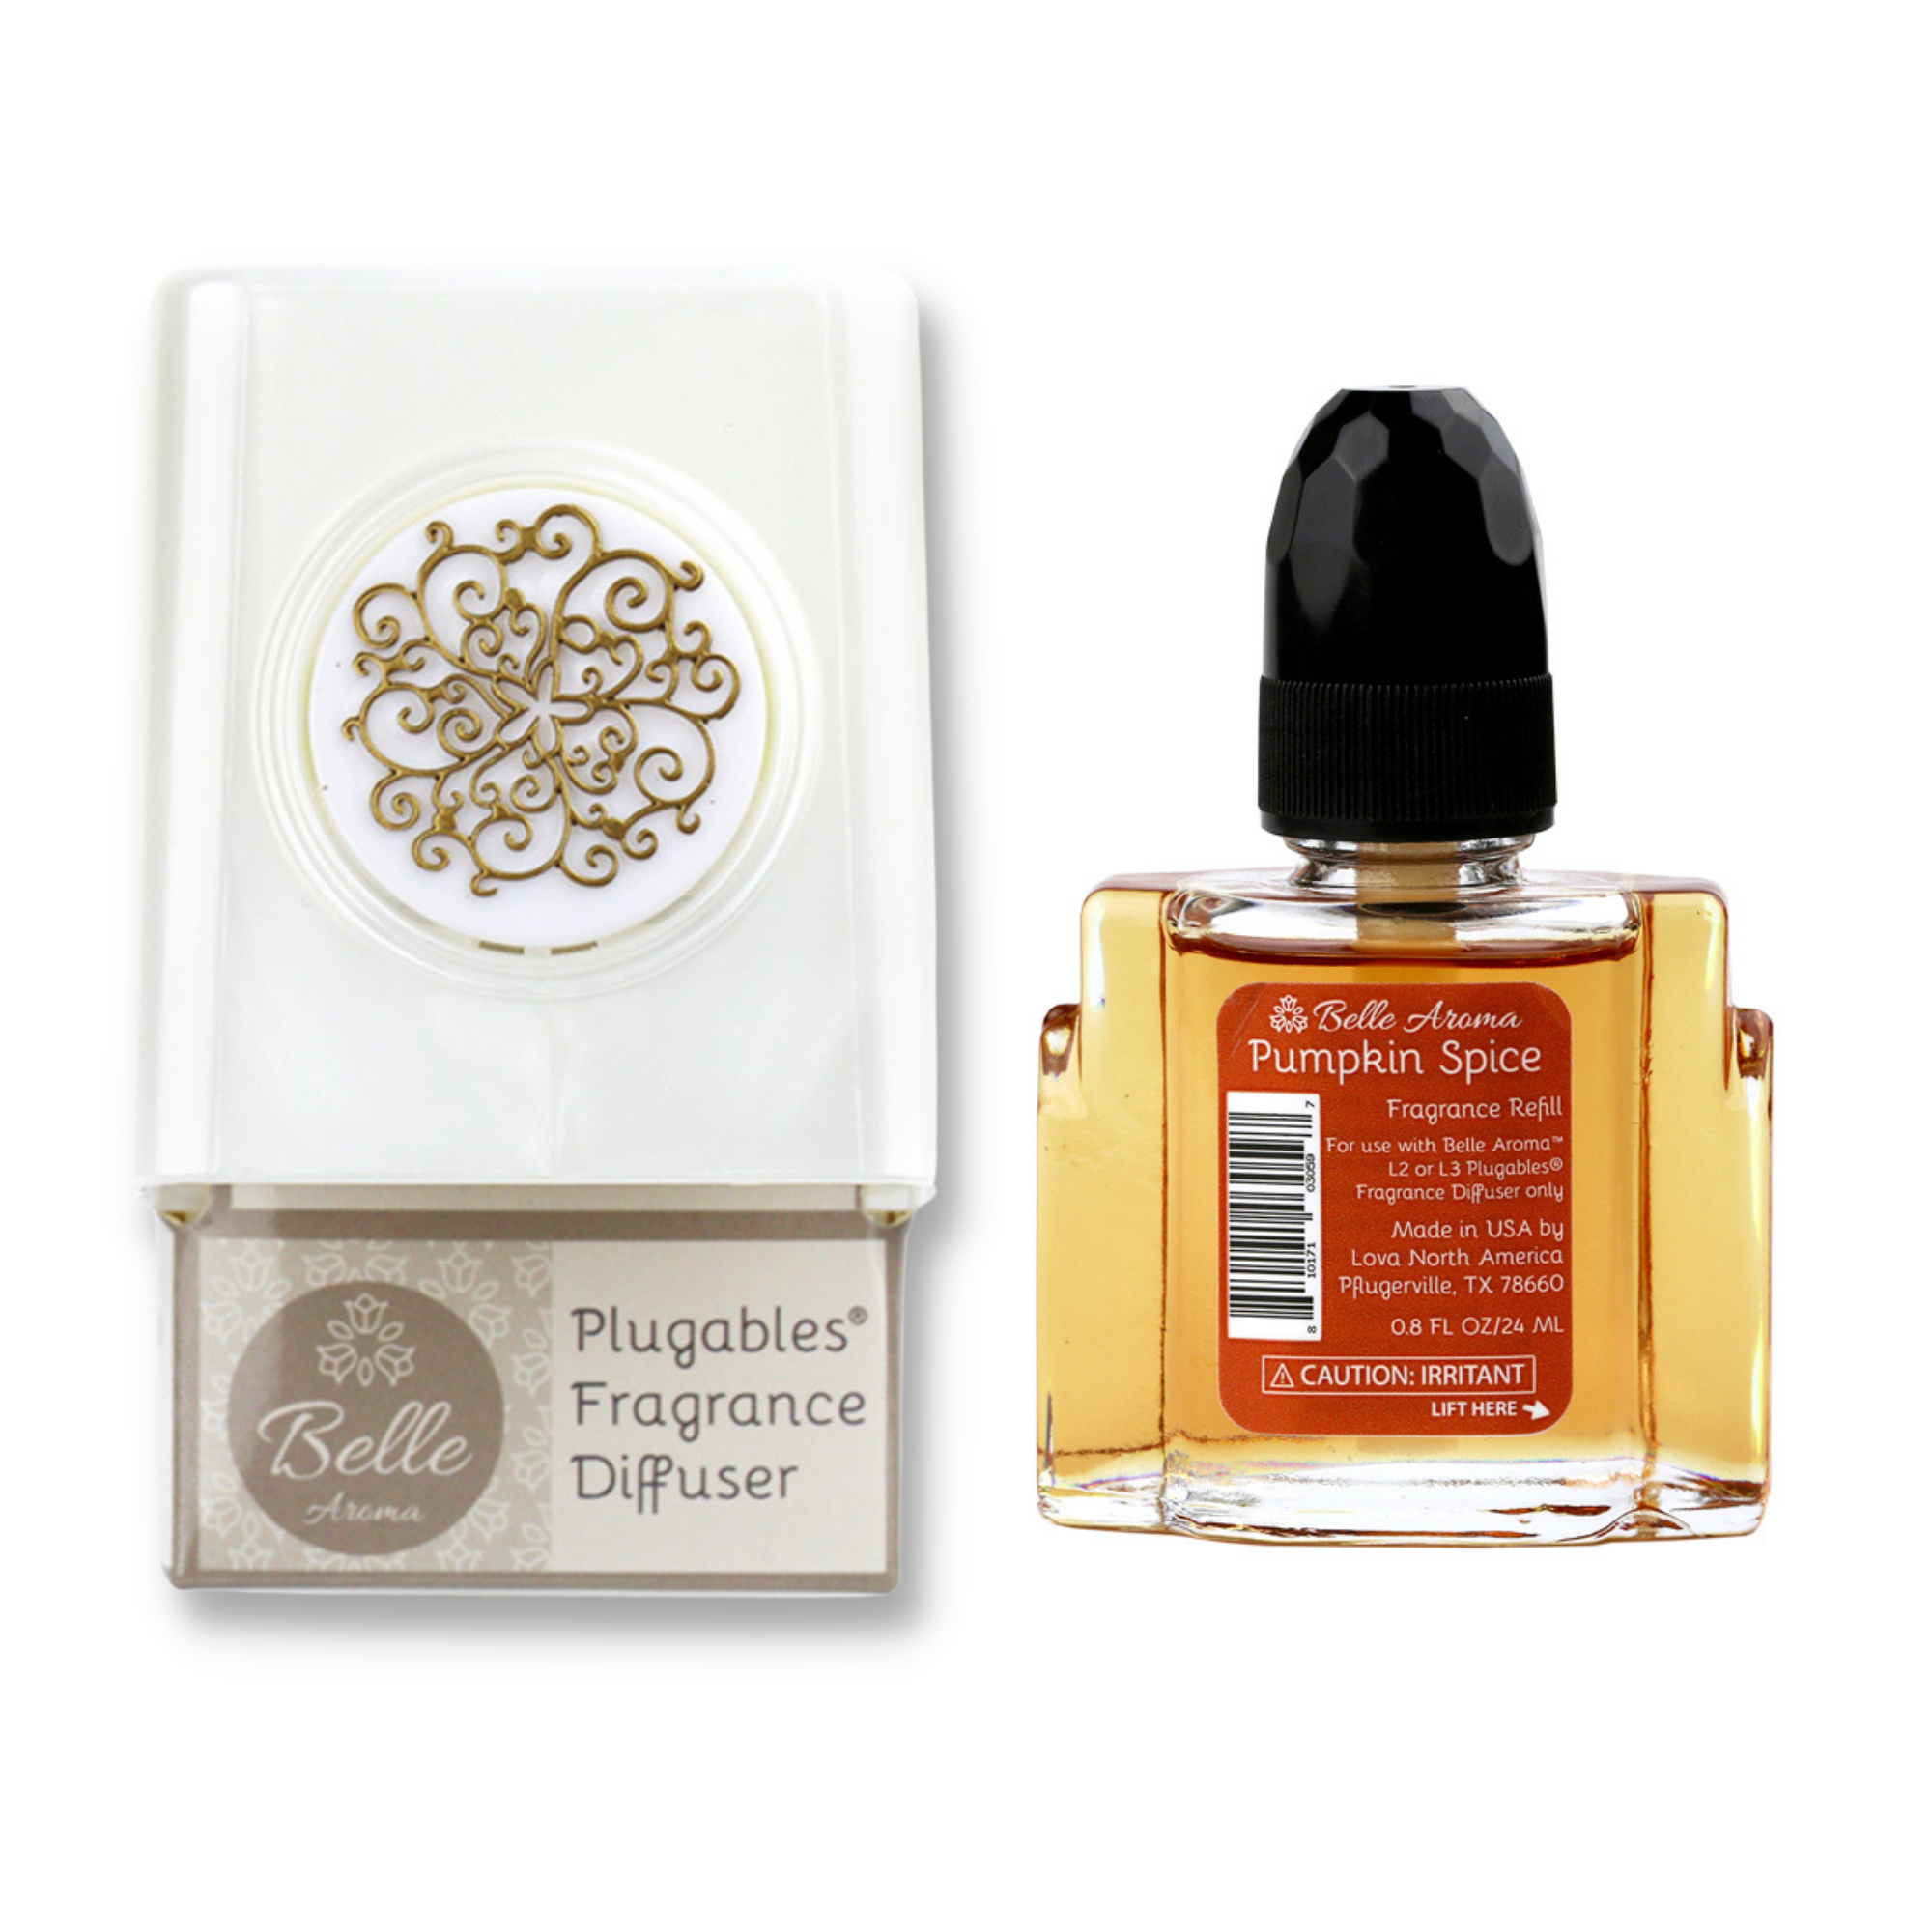 Floral Medallion Plugables® Plugin Aromalectric® Scented Oil Diffuser - Pearl White with Pumpkin Spice Fragrance Oil Home Fragrance Accessories